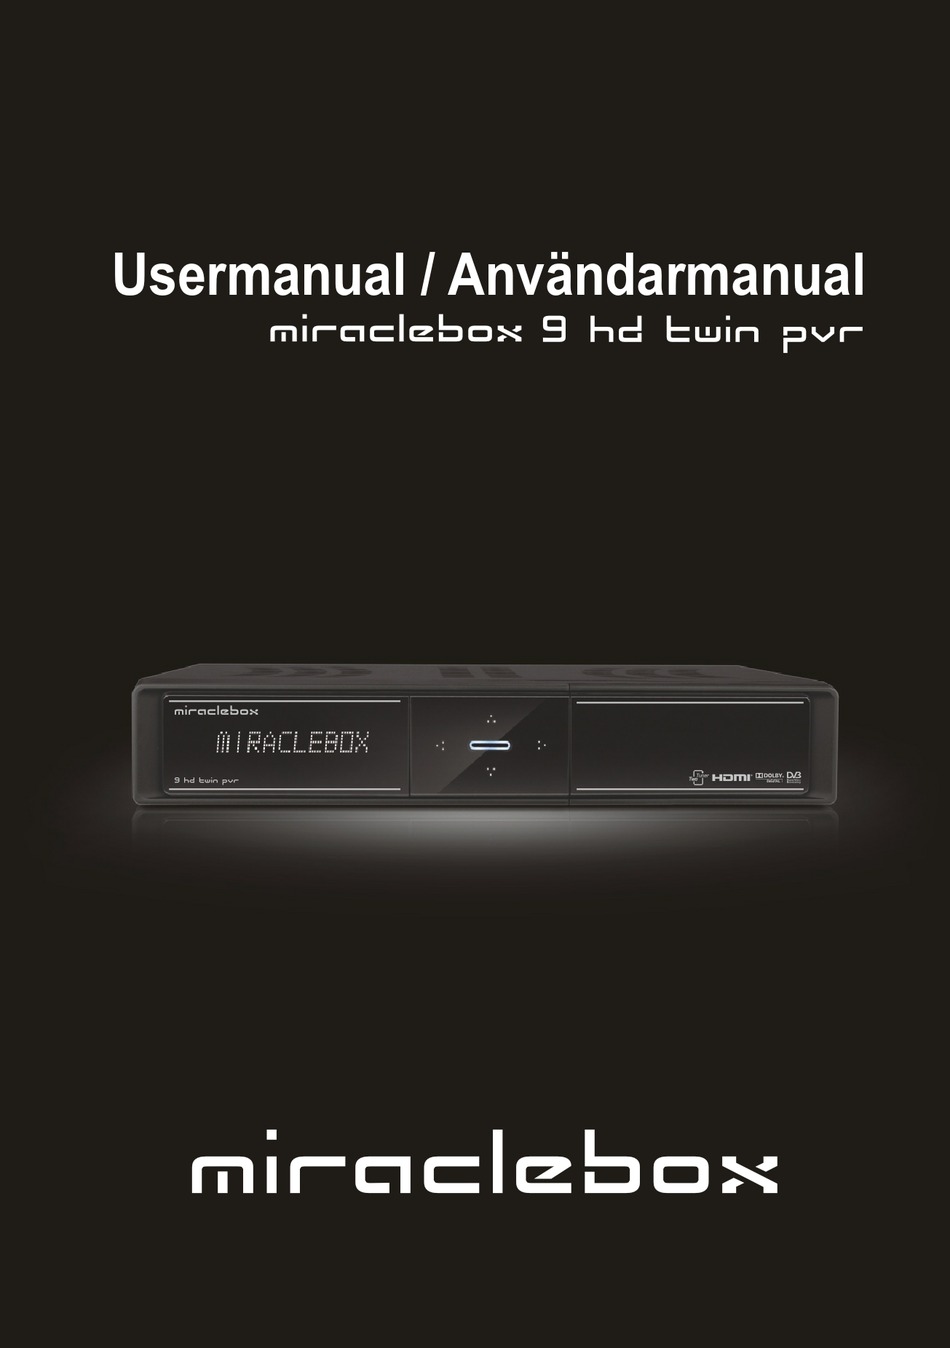 hd pvr 2 software free download